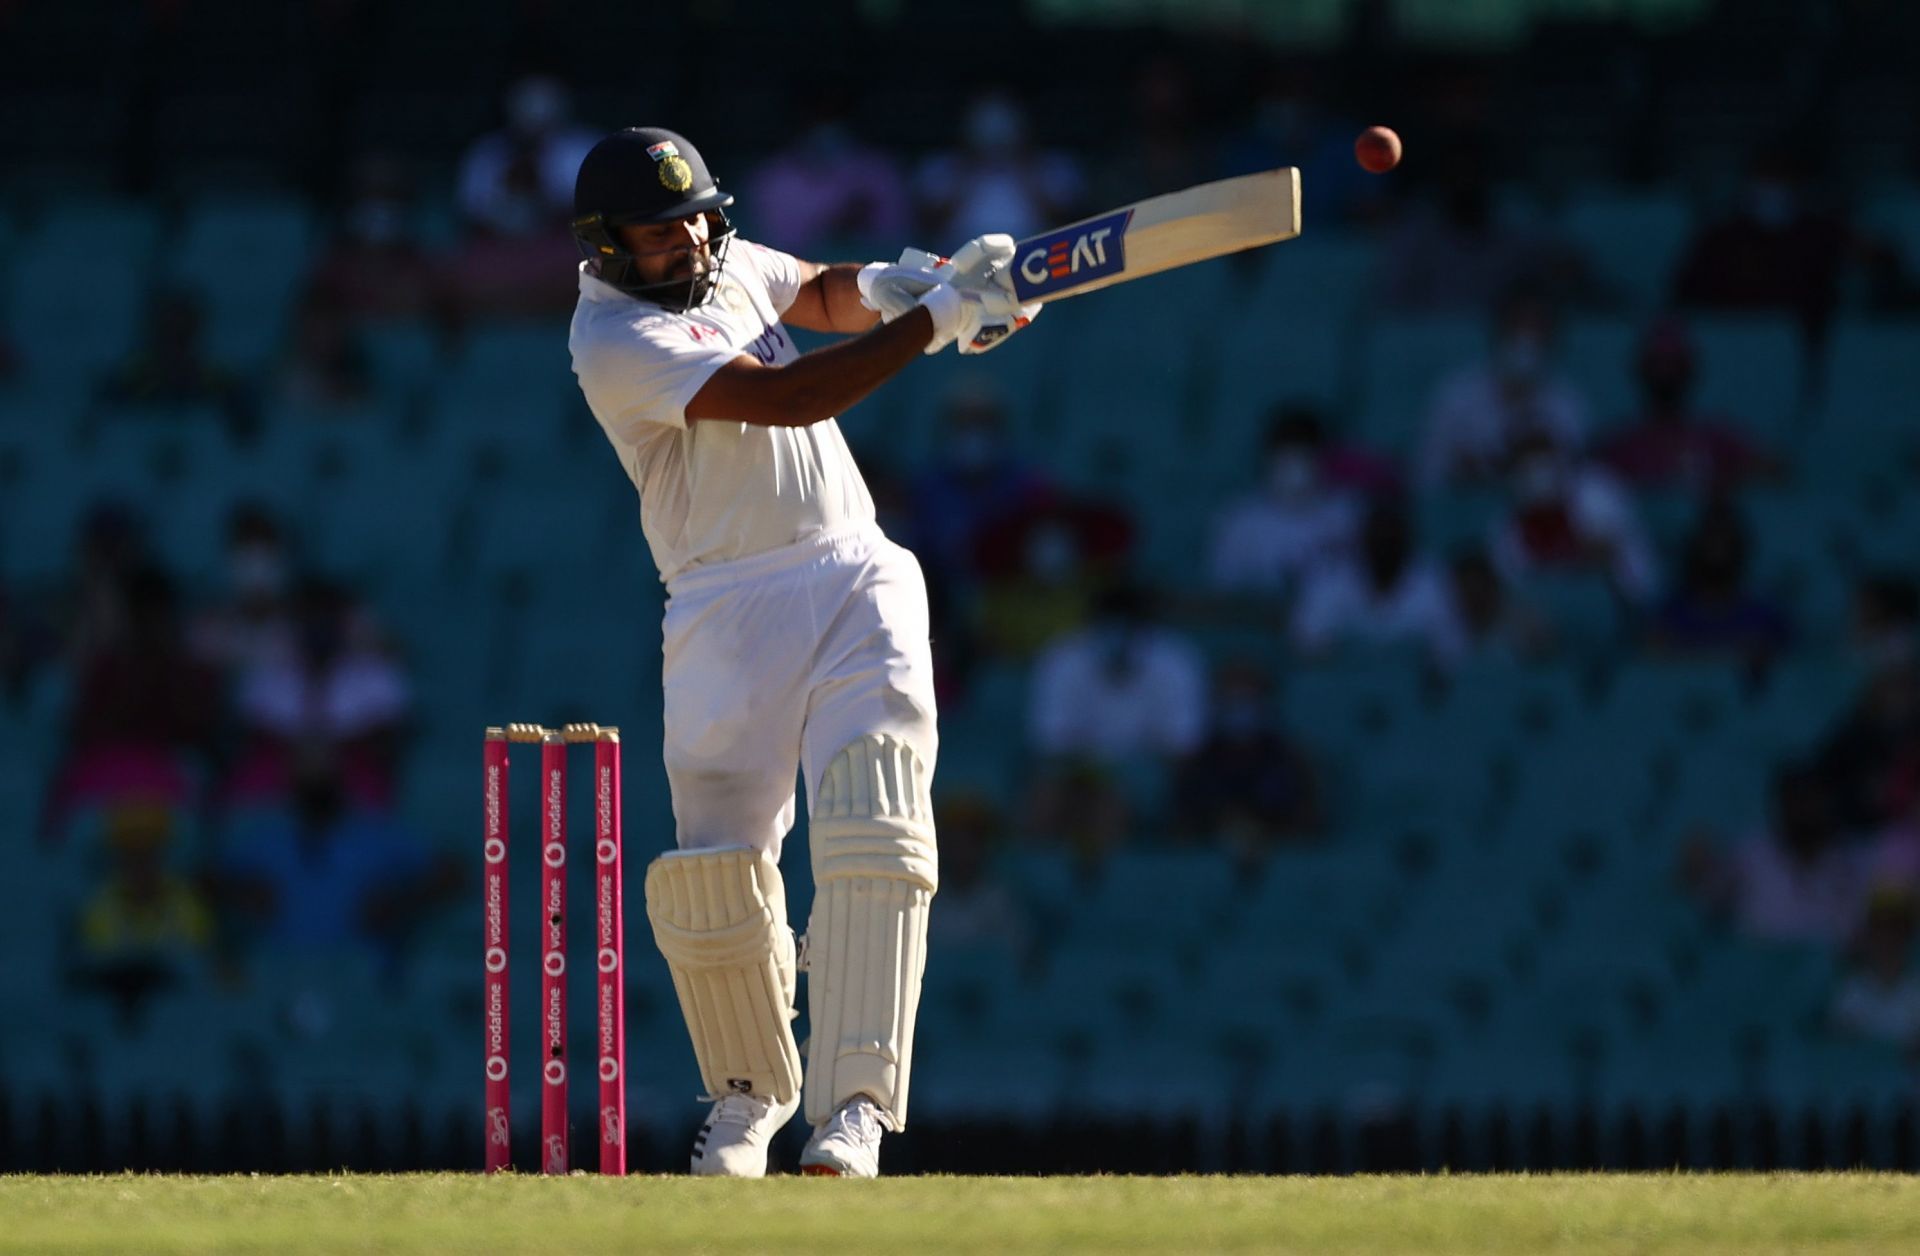 The Hitman batting during the Sydney Test in January 2021. Pic: Getty Images